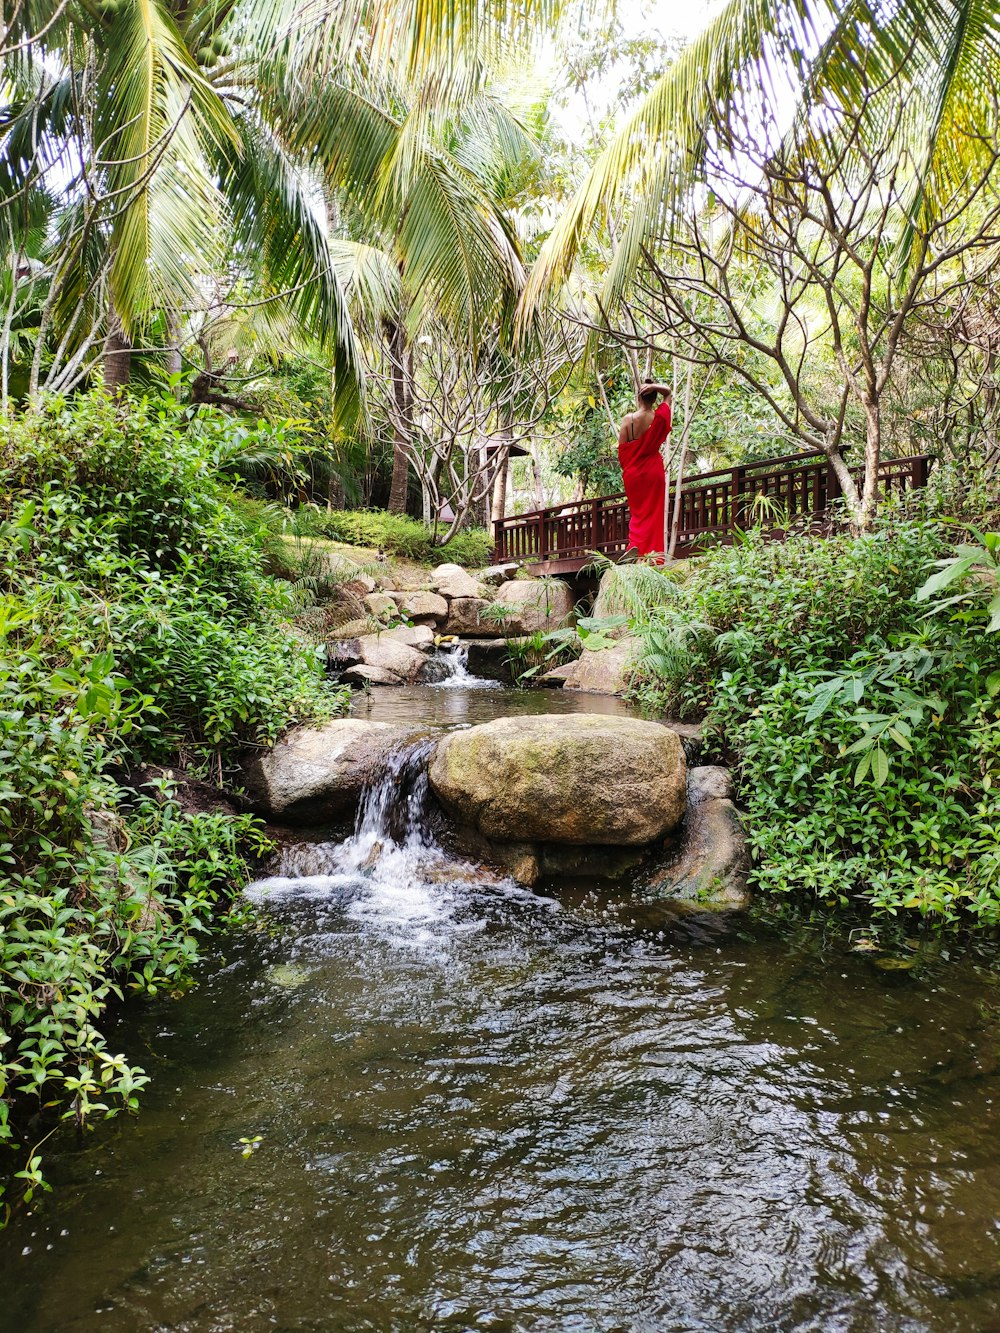 person in red dress standing near water pond